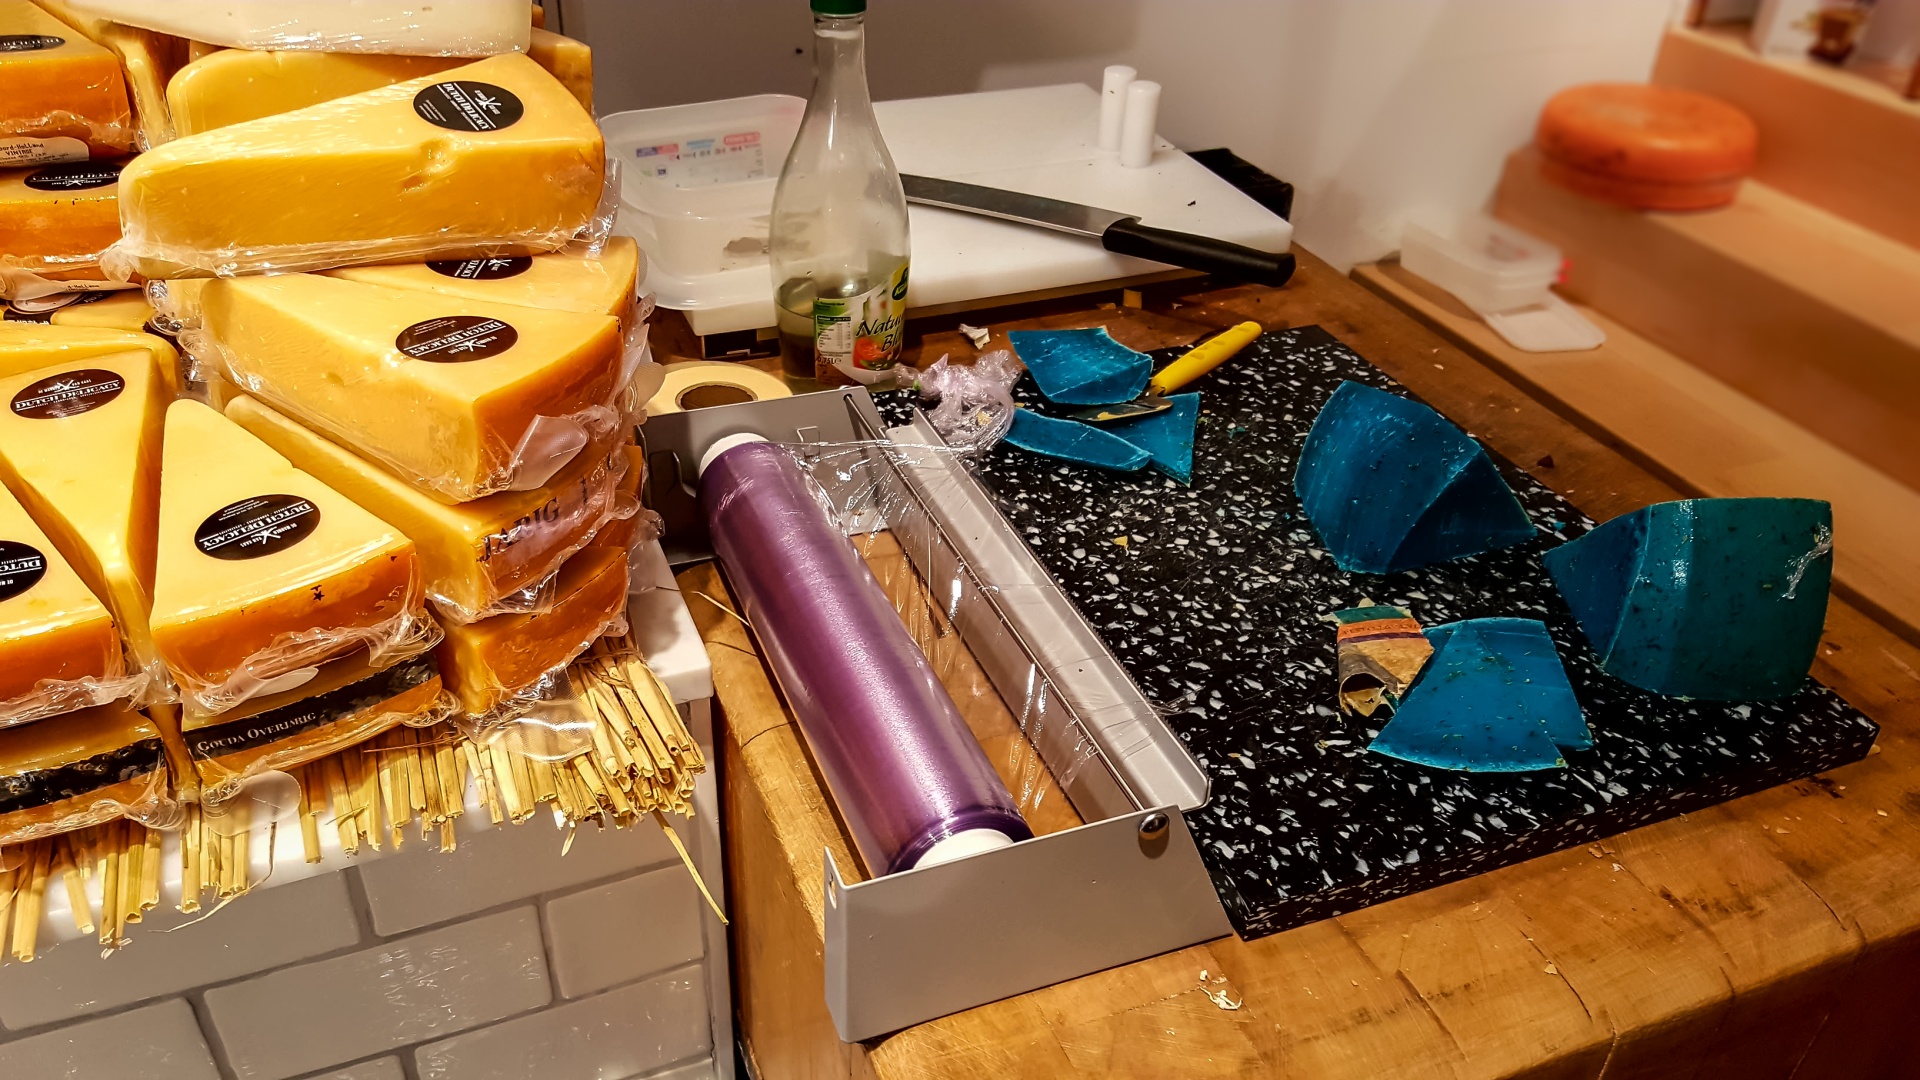 Fromage Fort ( Strong Cheese)